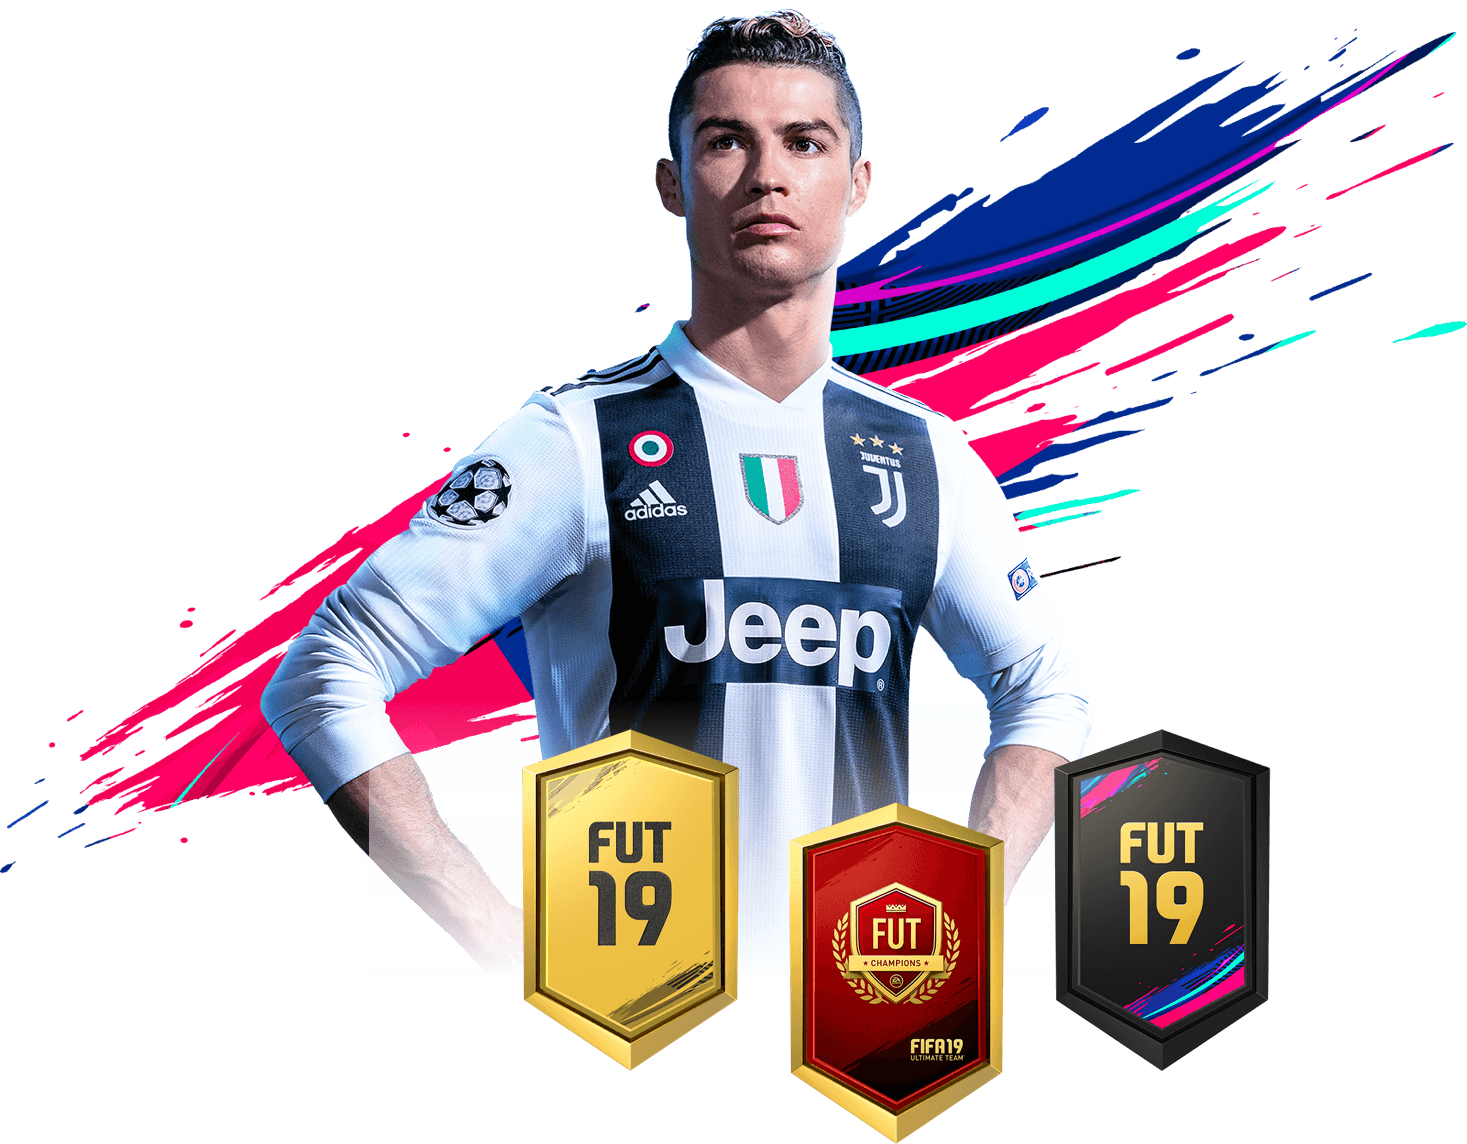 Ronaldo with FUT packs on a colourful watermark design